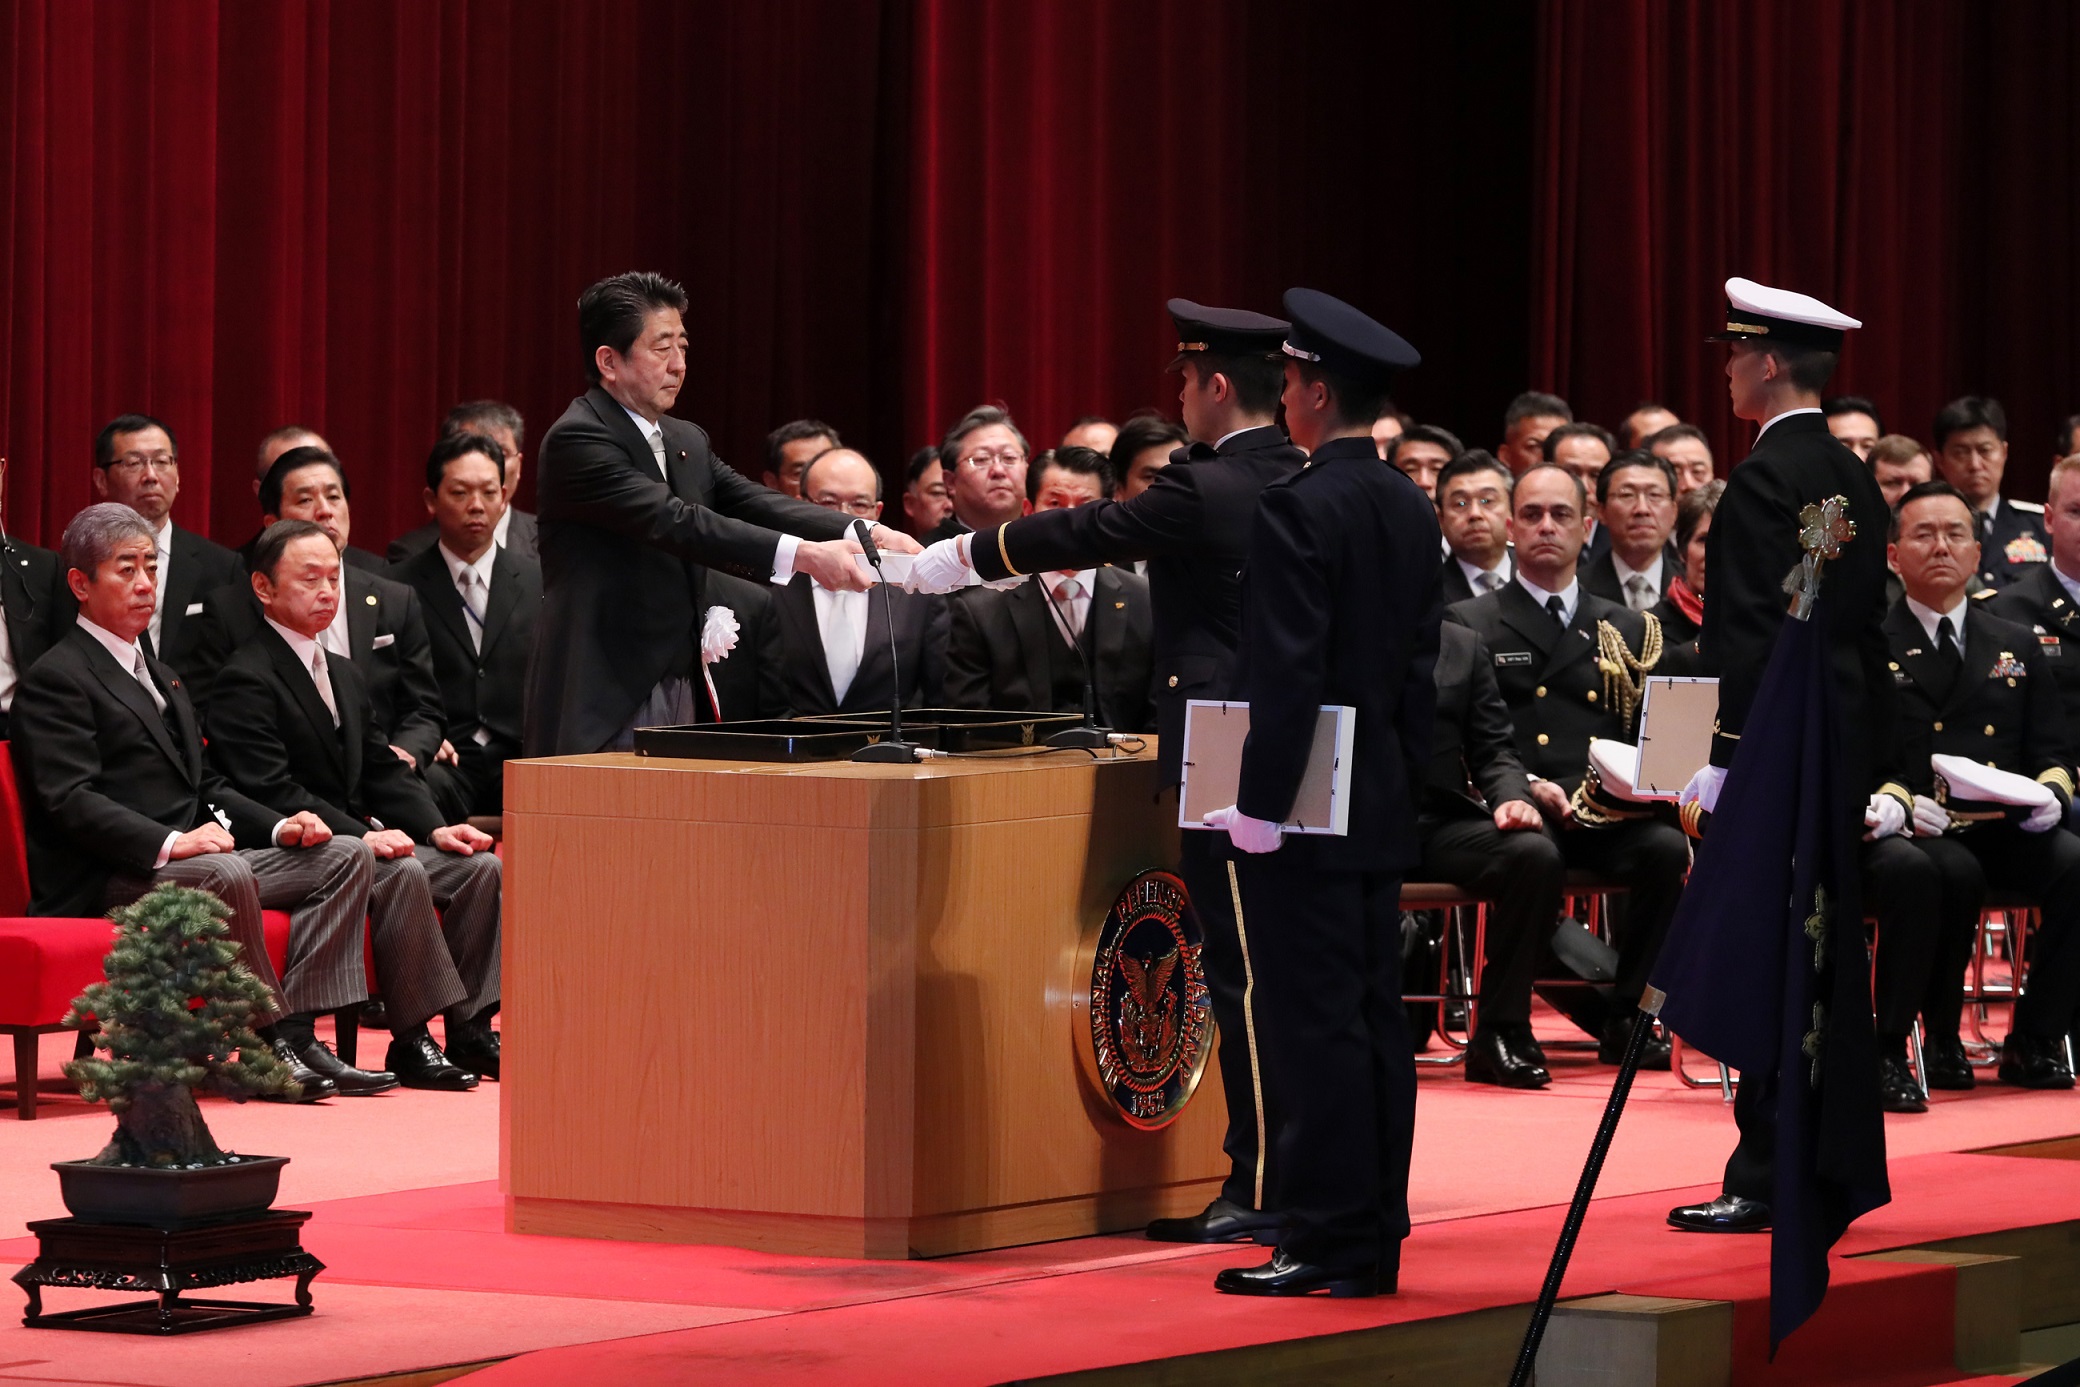 Photograph of the assignment and oath of service ceremony